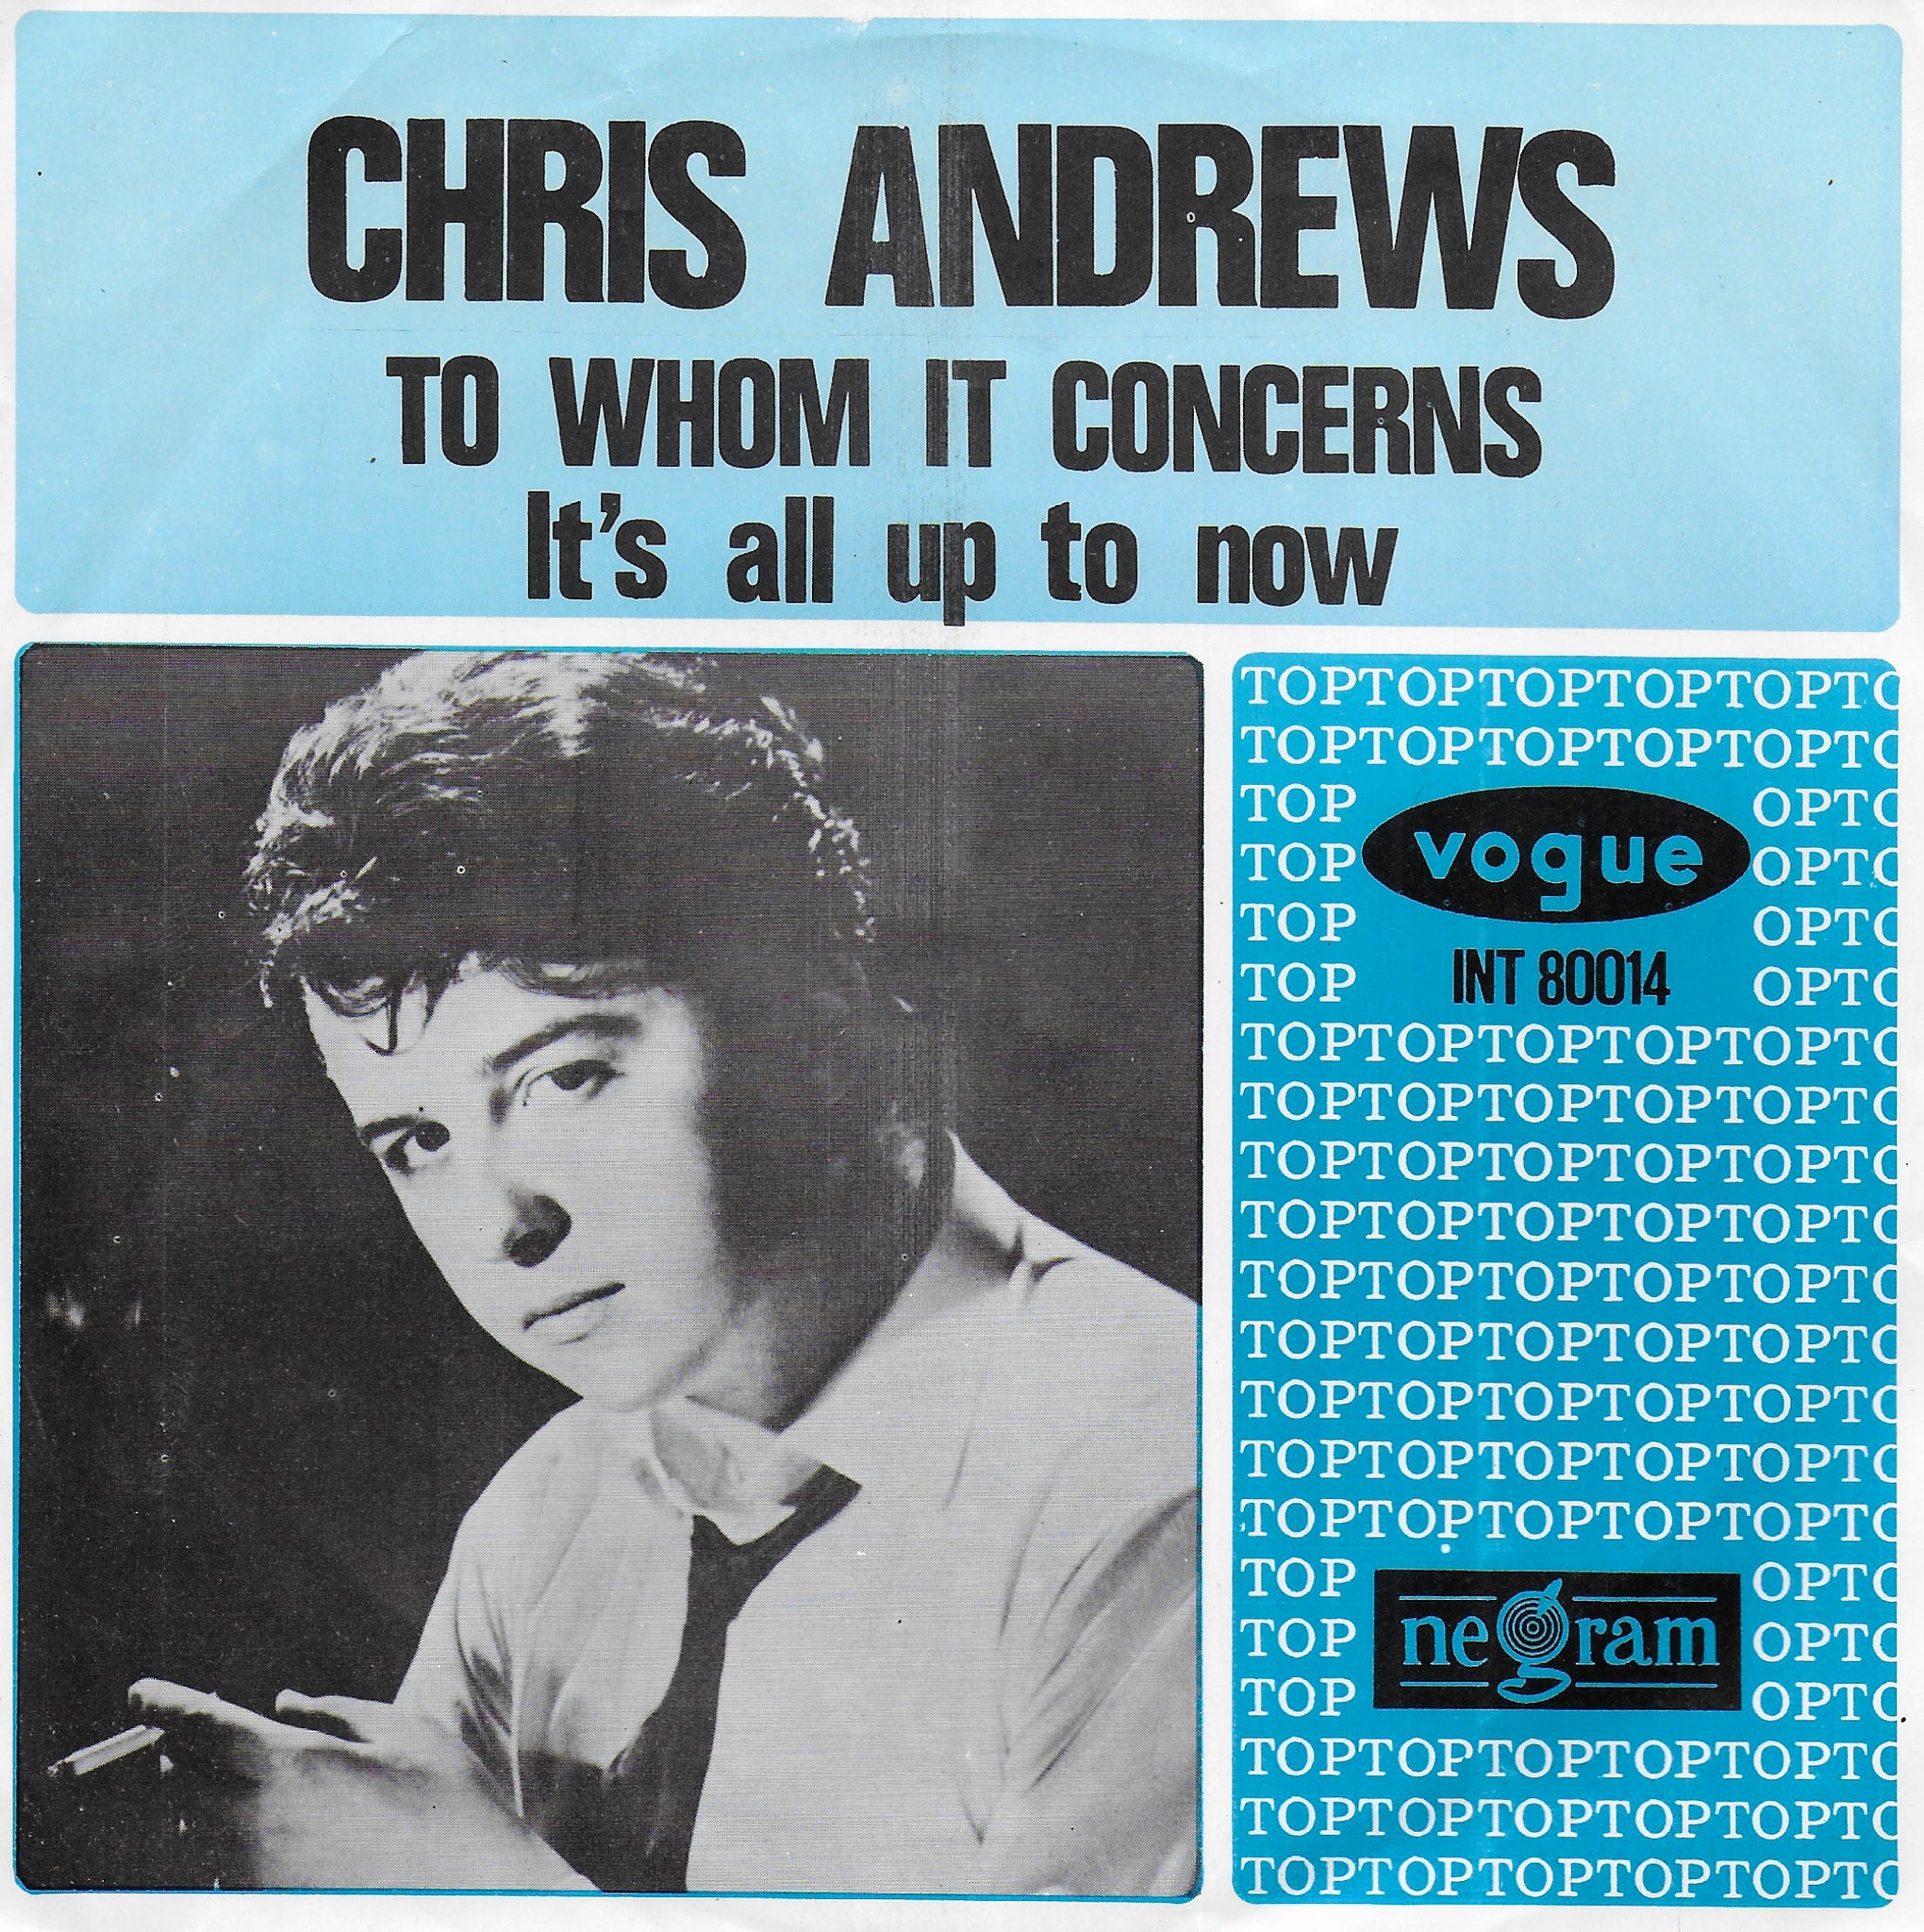 Chris Andrews - To whom it concerns